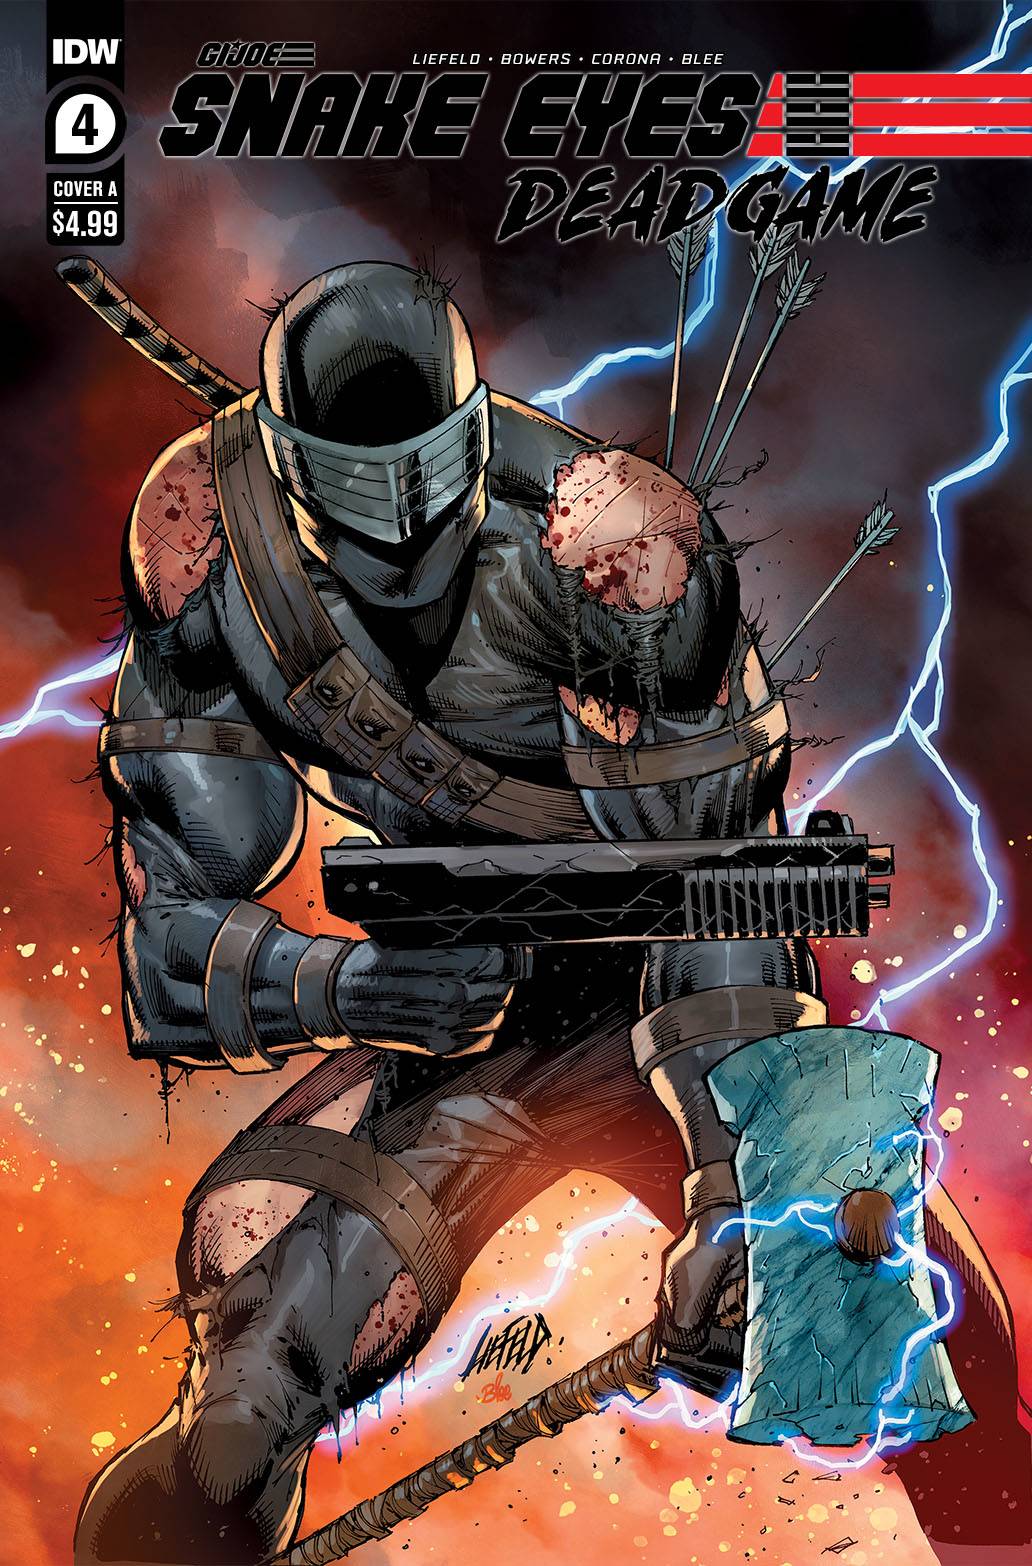 Snake Eyes Deadgame #4 Cover A Liefeld (Of 5)